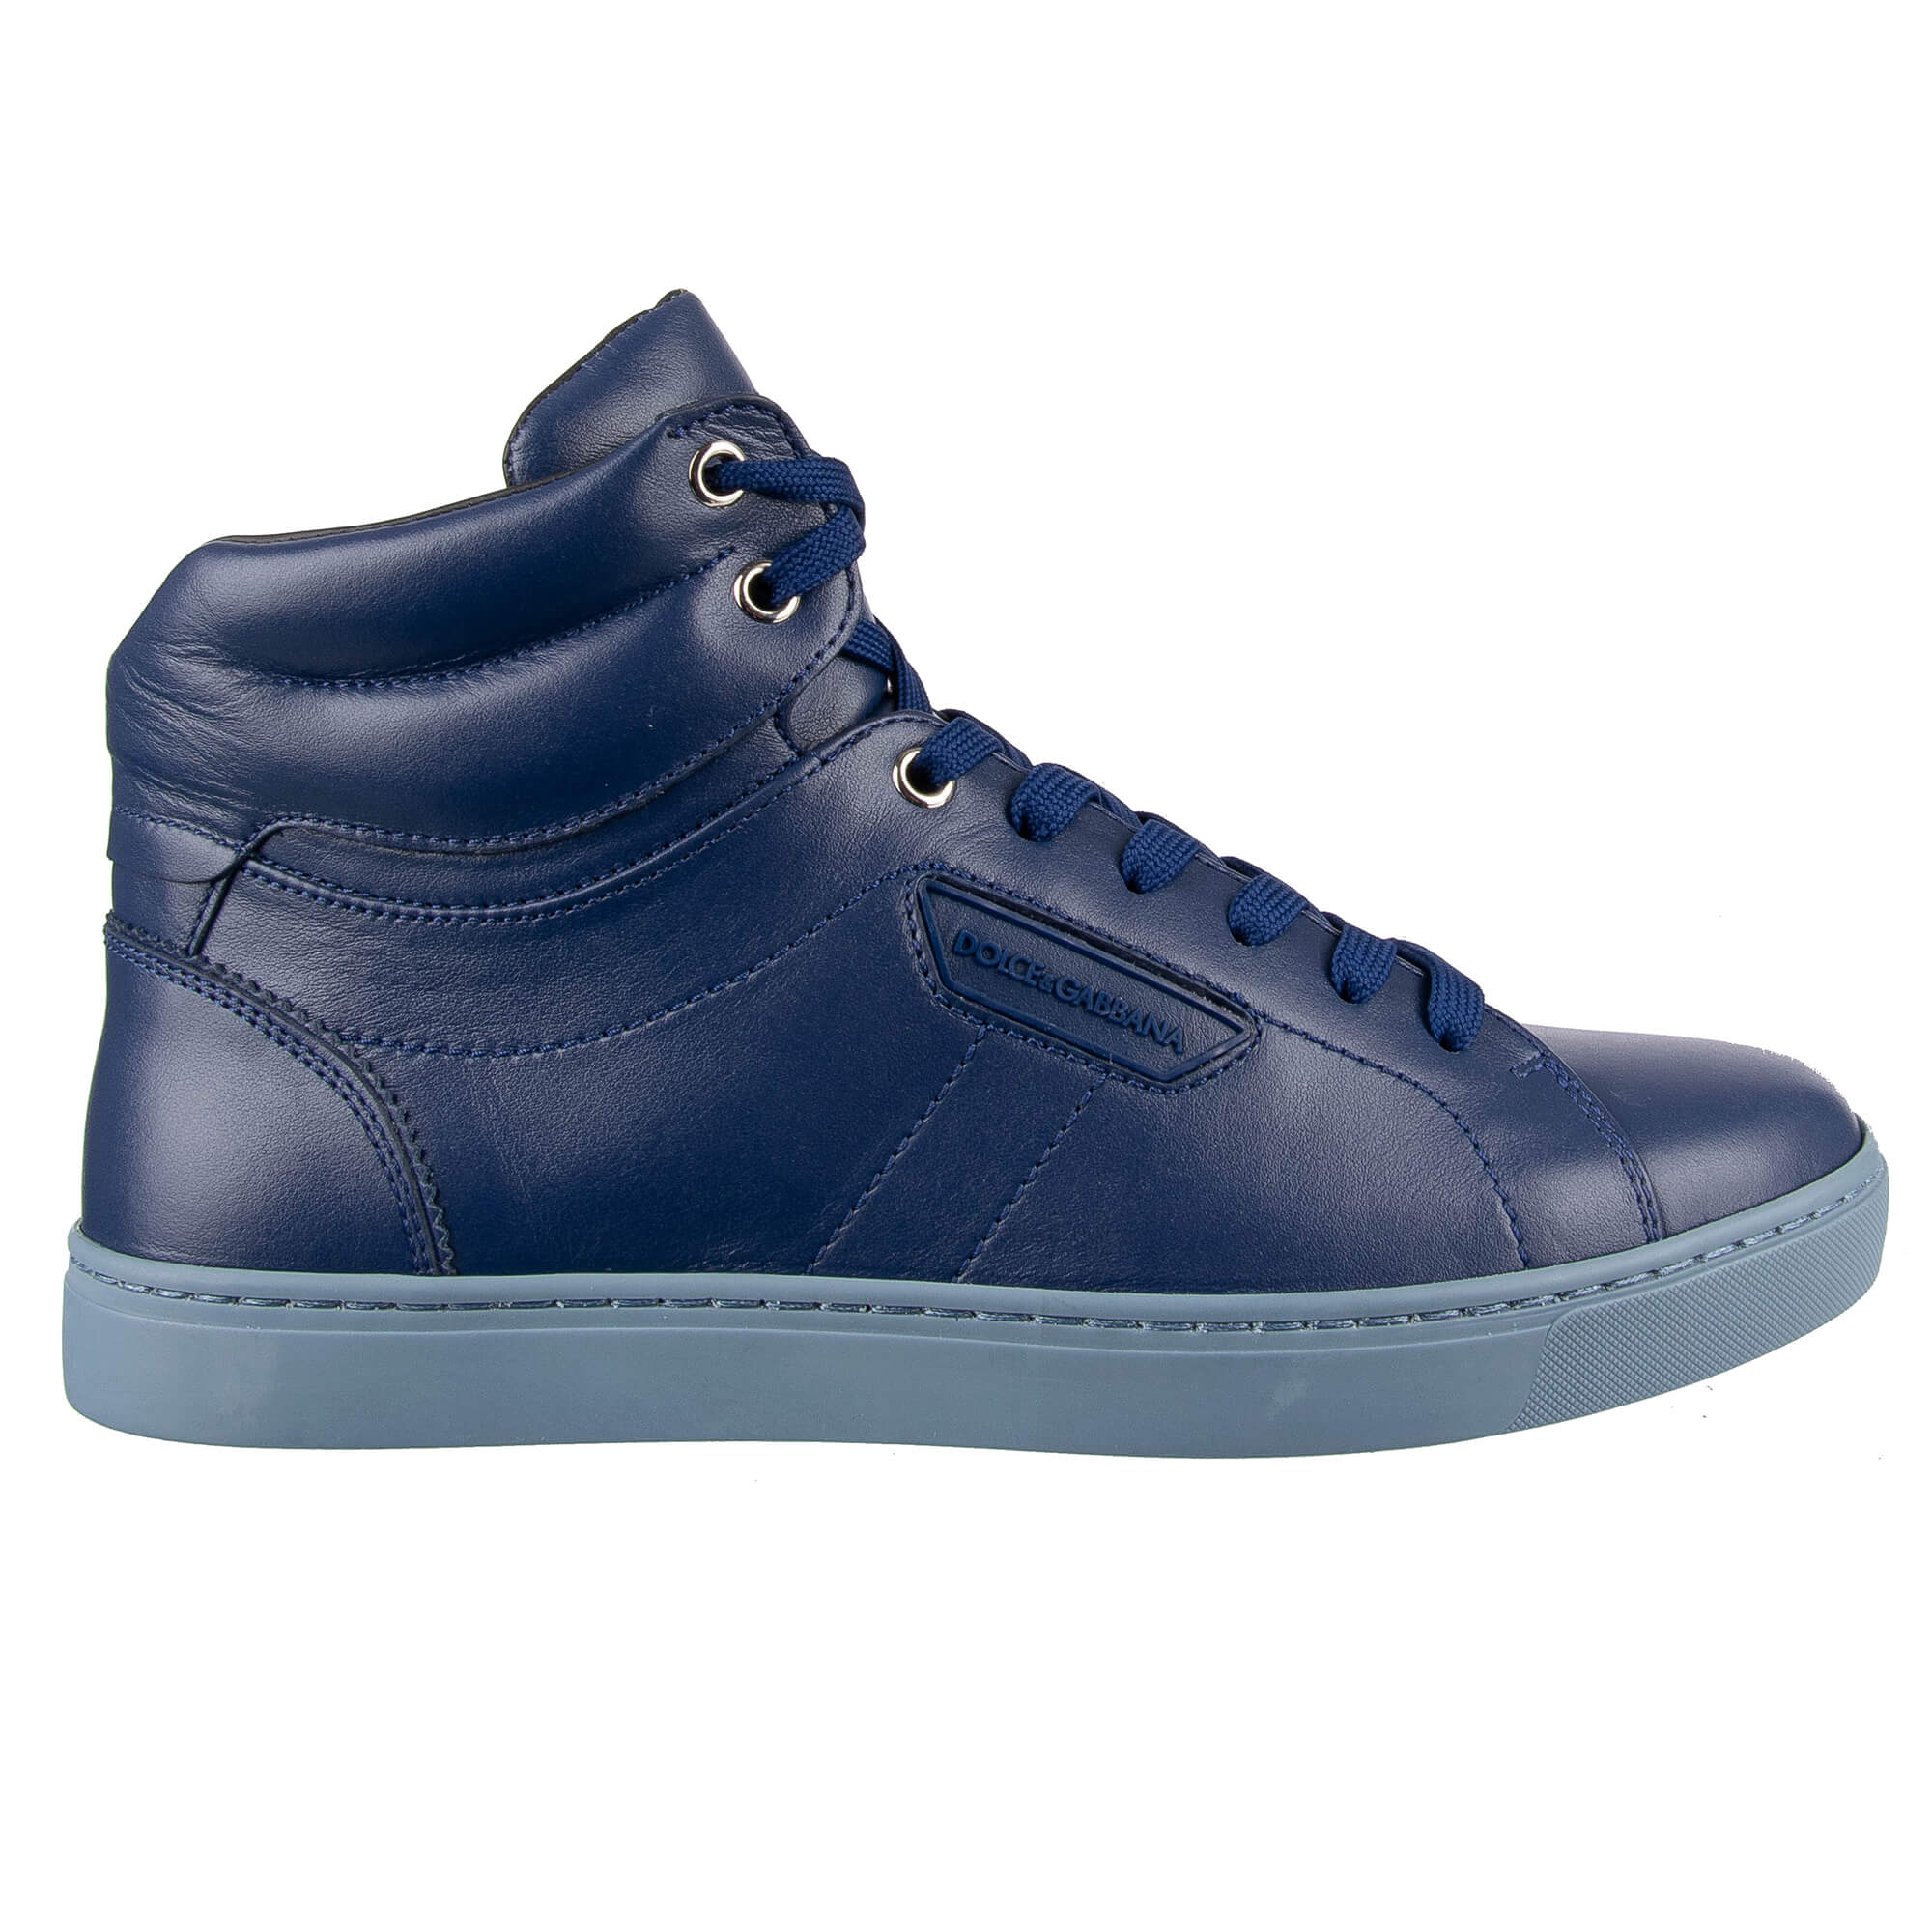 Situation cafeteria Ulv i fåretøj Dolce & Gabbana High-Top Leather Sneakers LONDON Blue | FASHION ROOMS